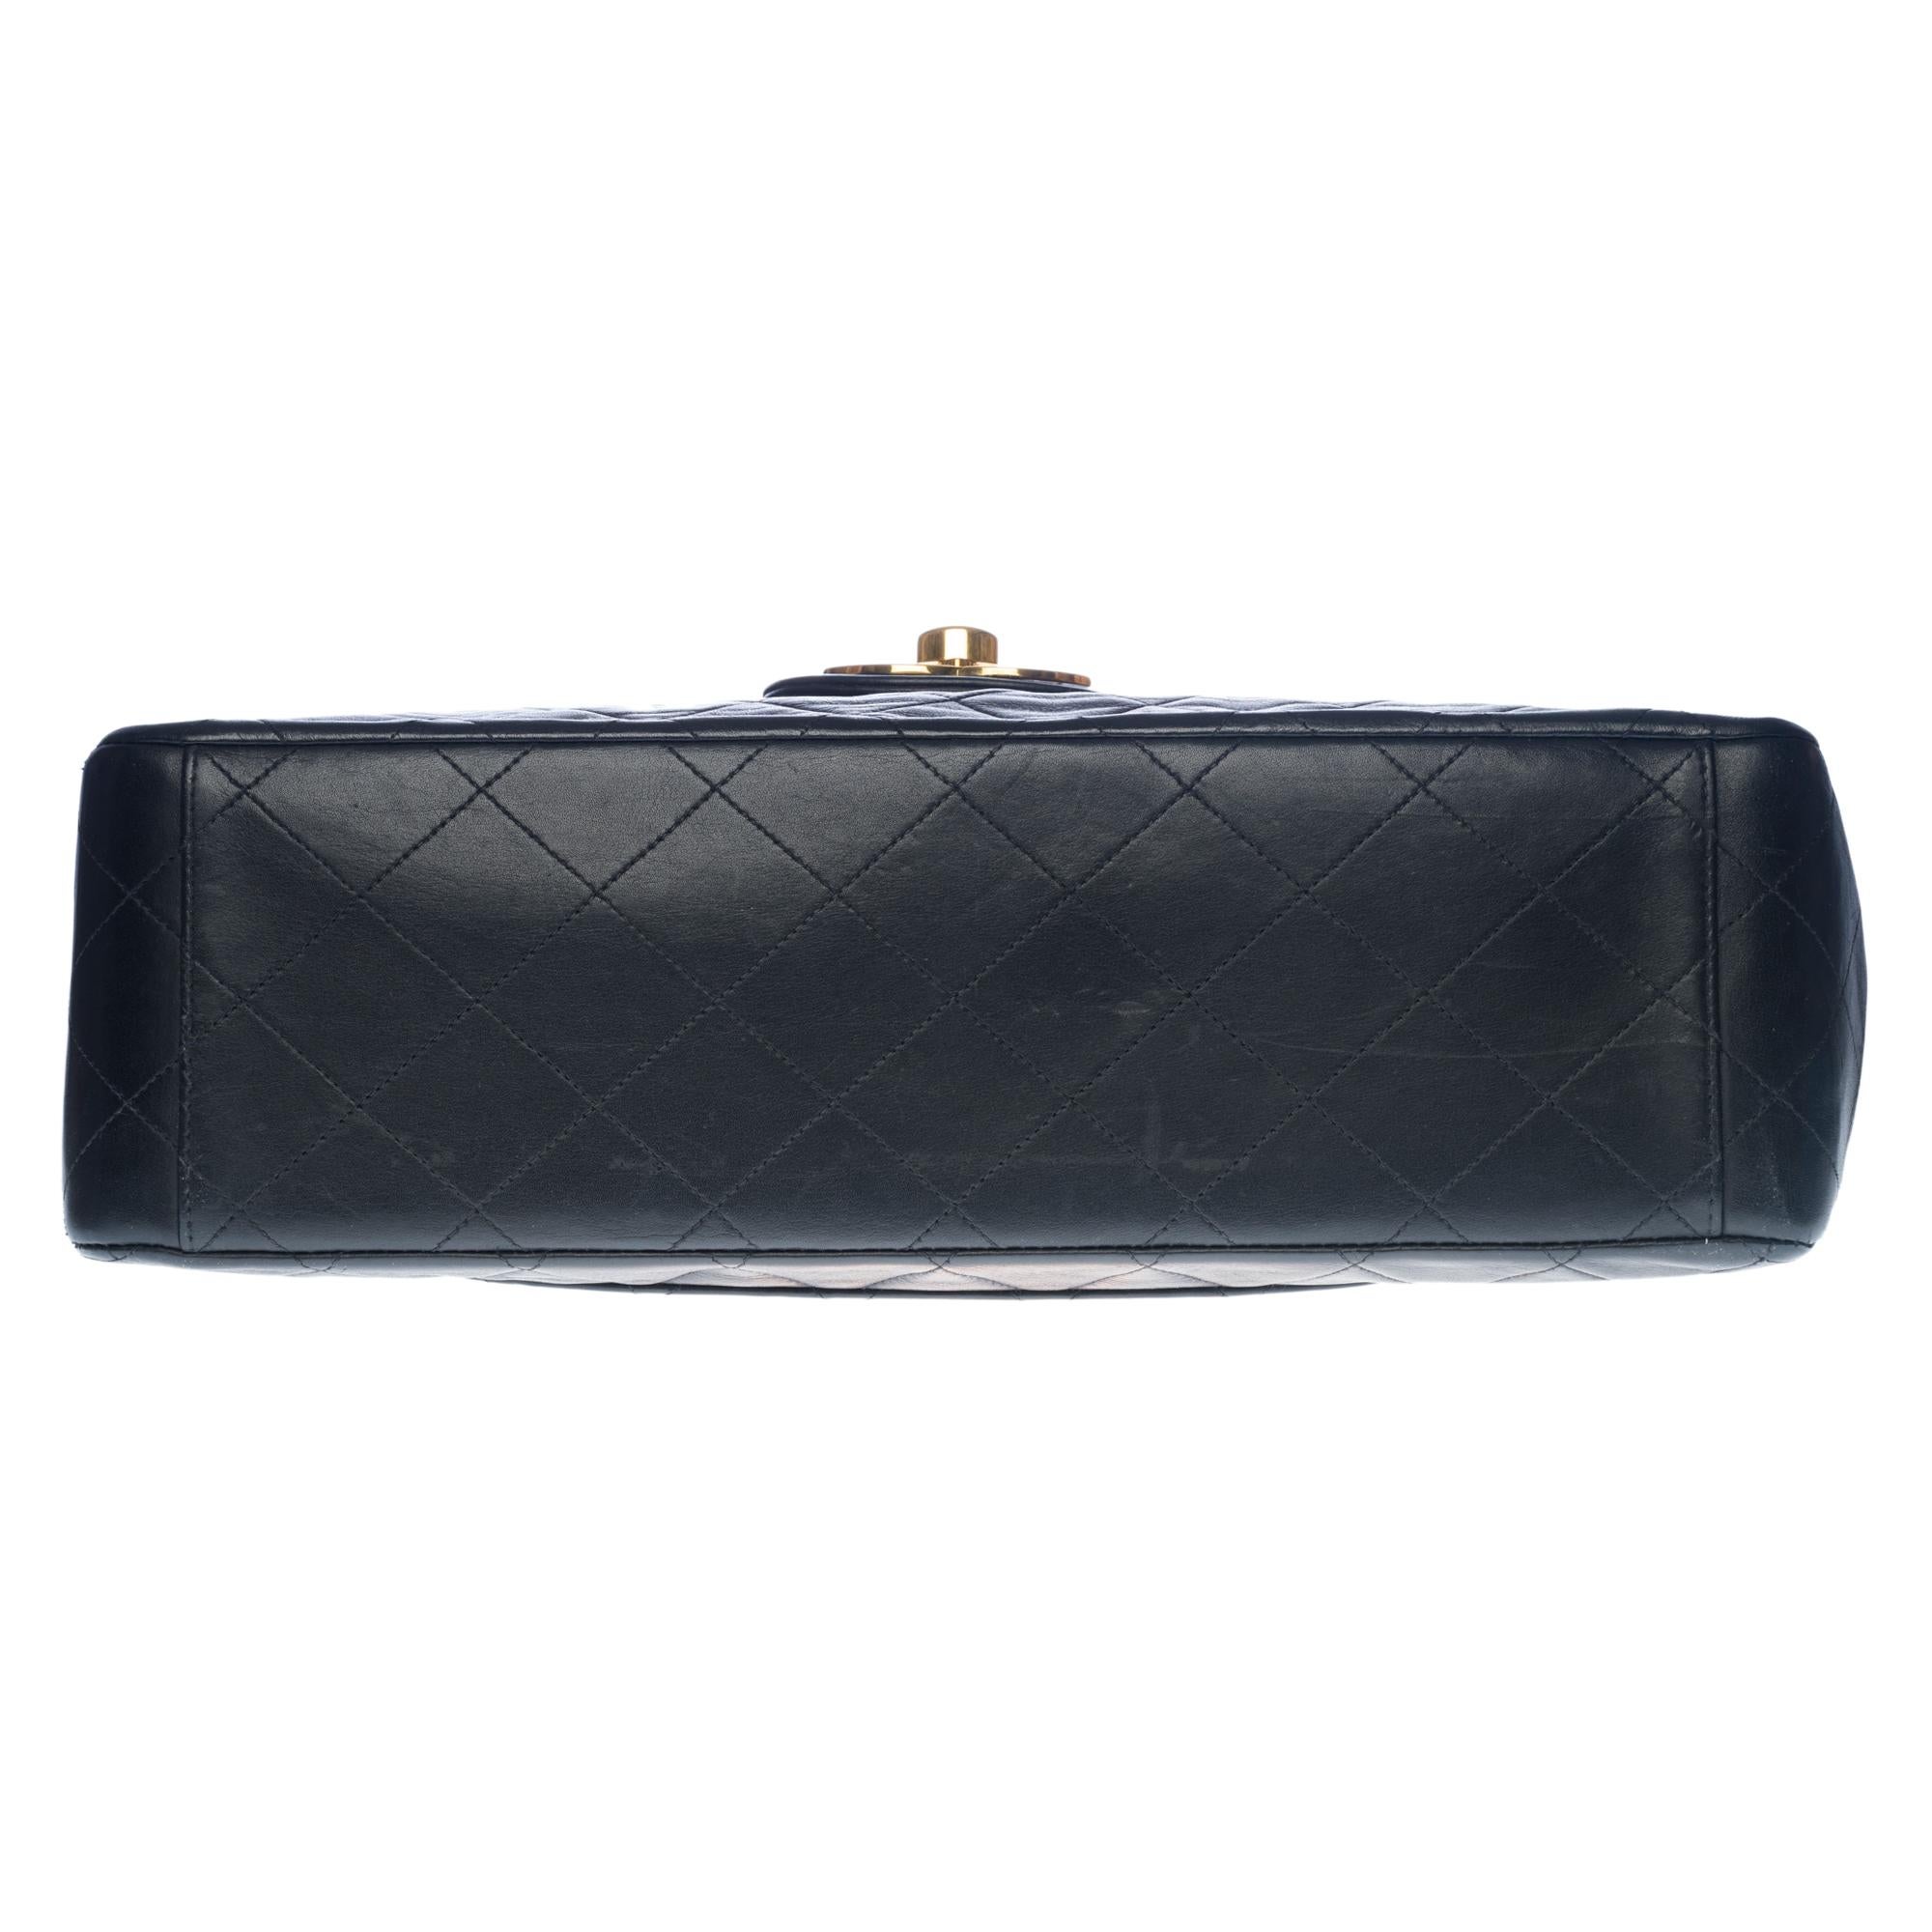 Chanel Timeless Maxi Jumbo flap shoulder bag in black quilted lambskin, GHW 3